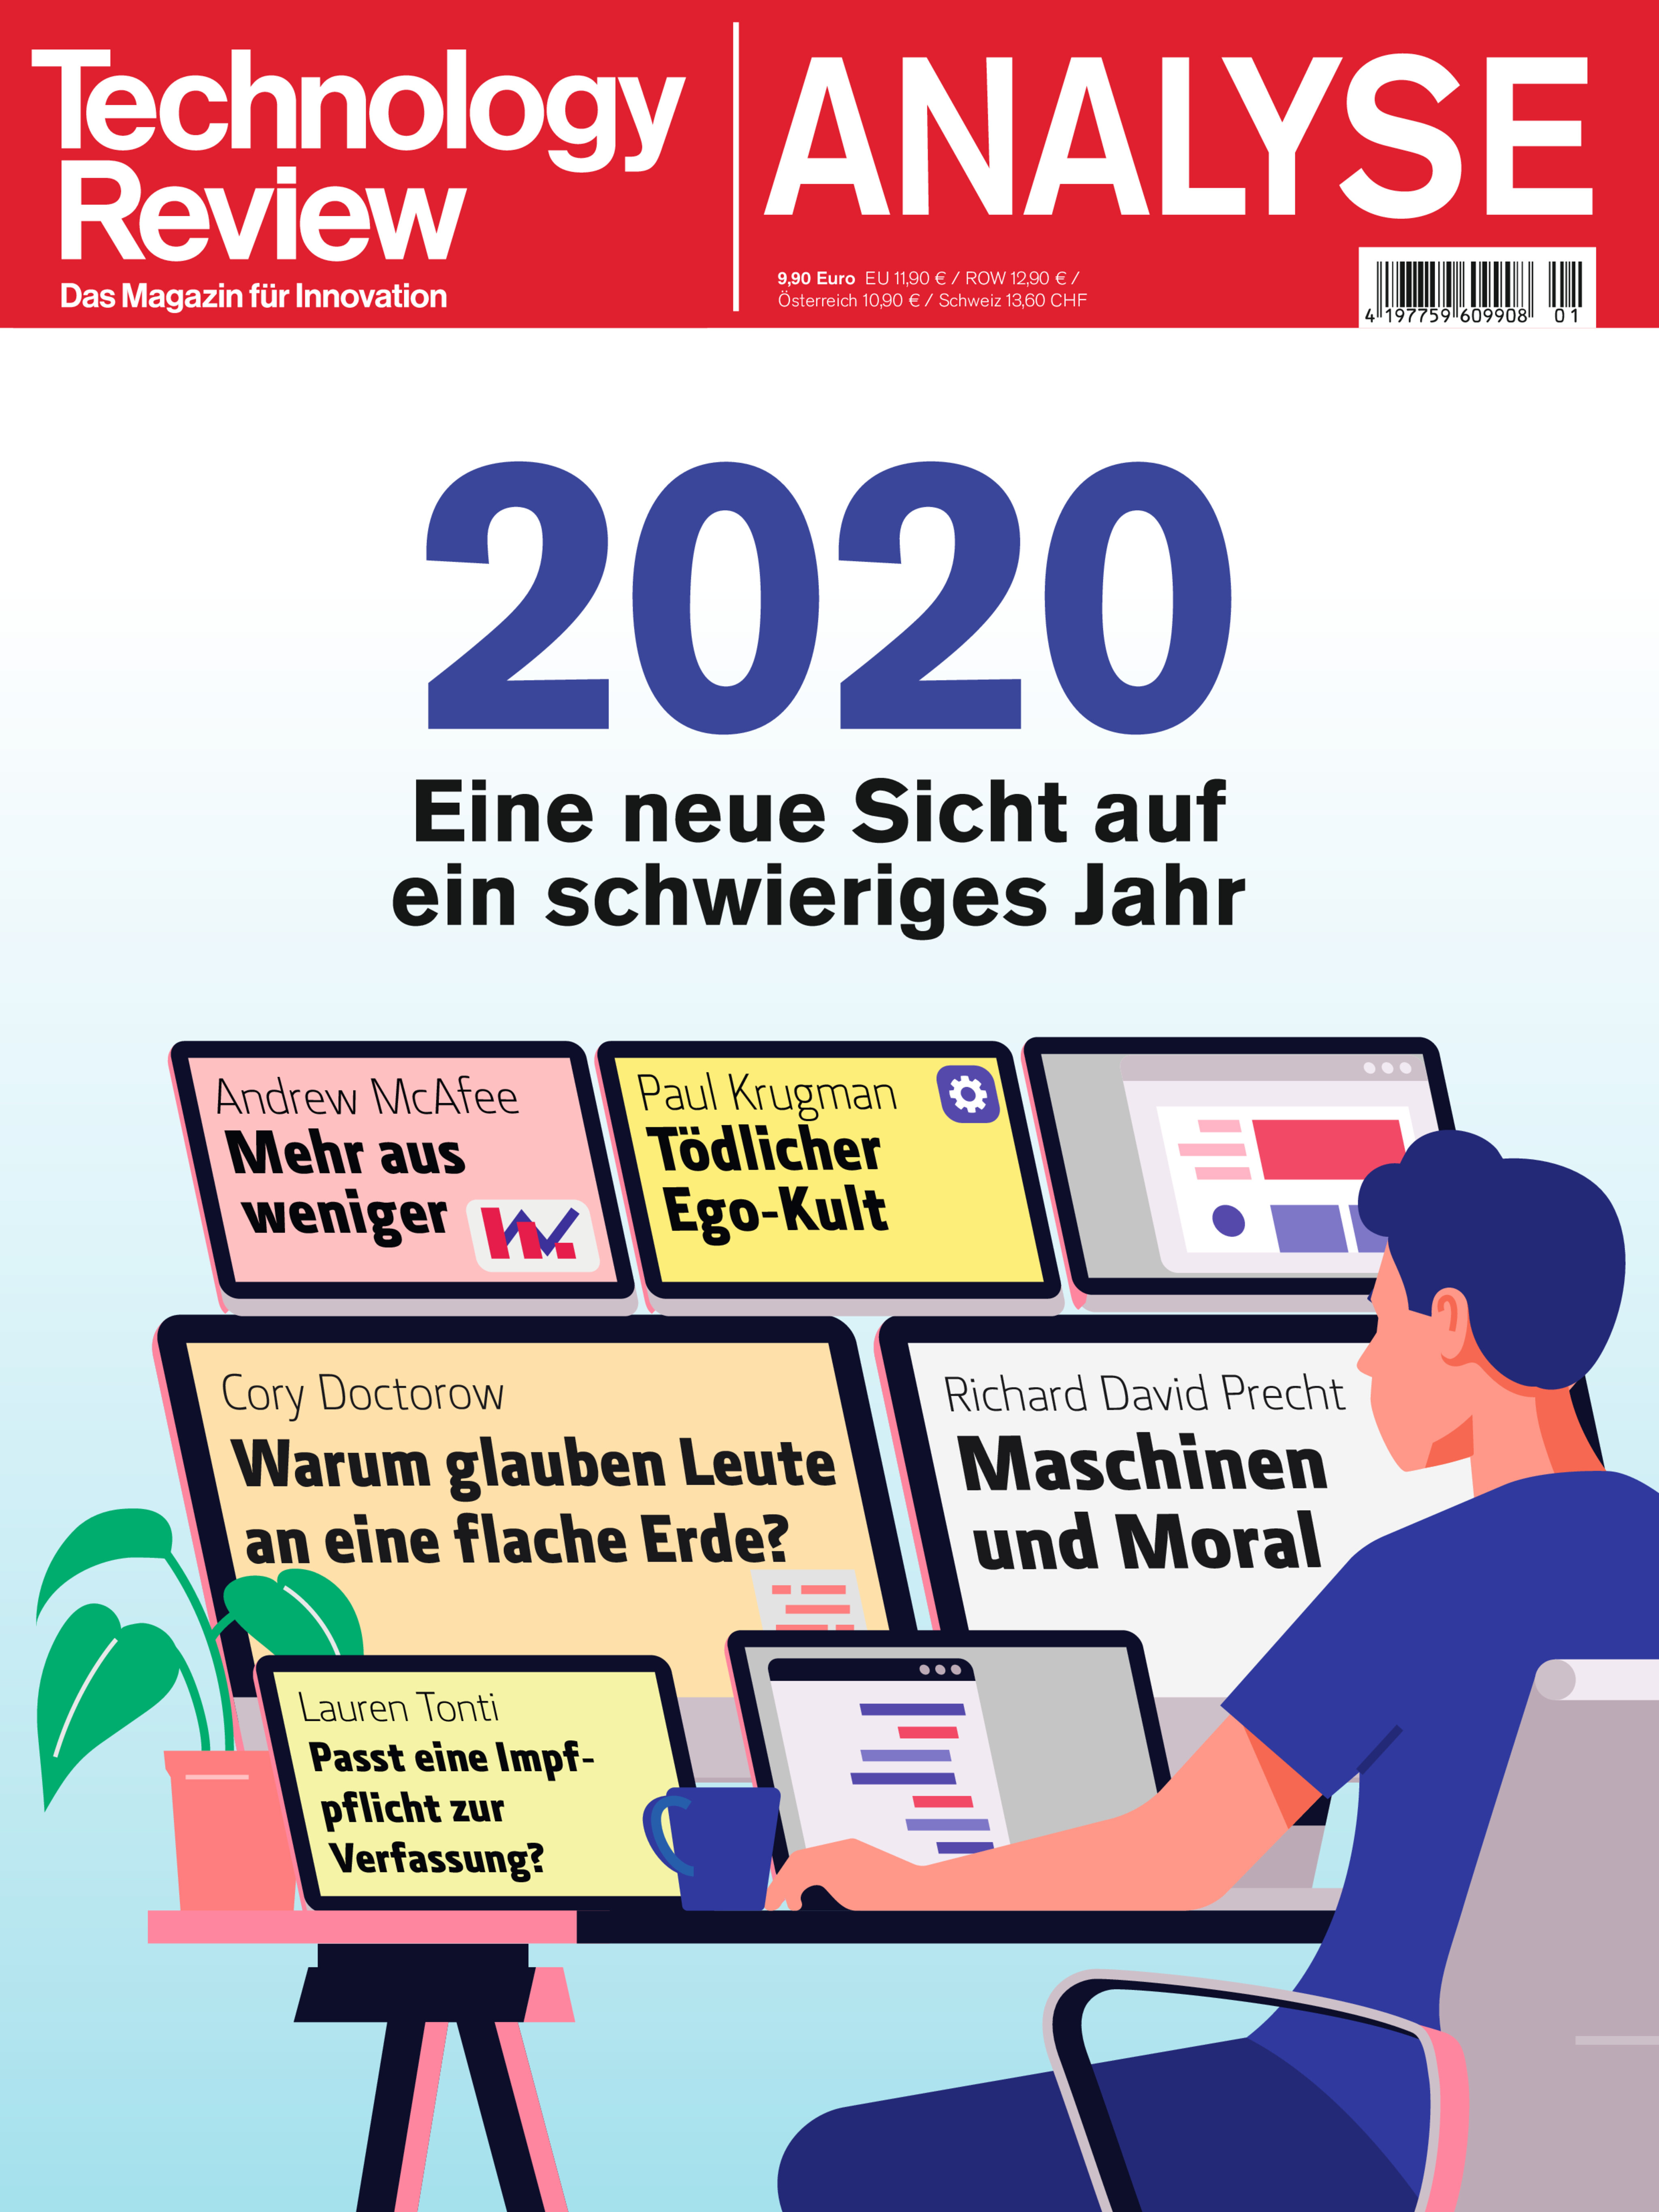 Technology Review ANALYSE 2020